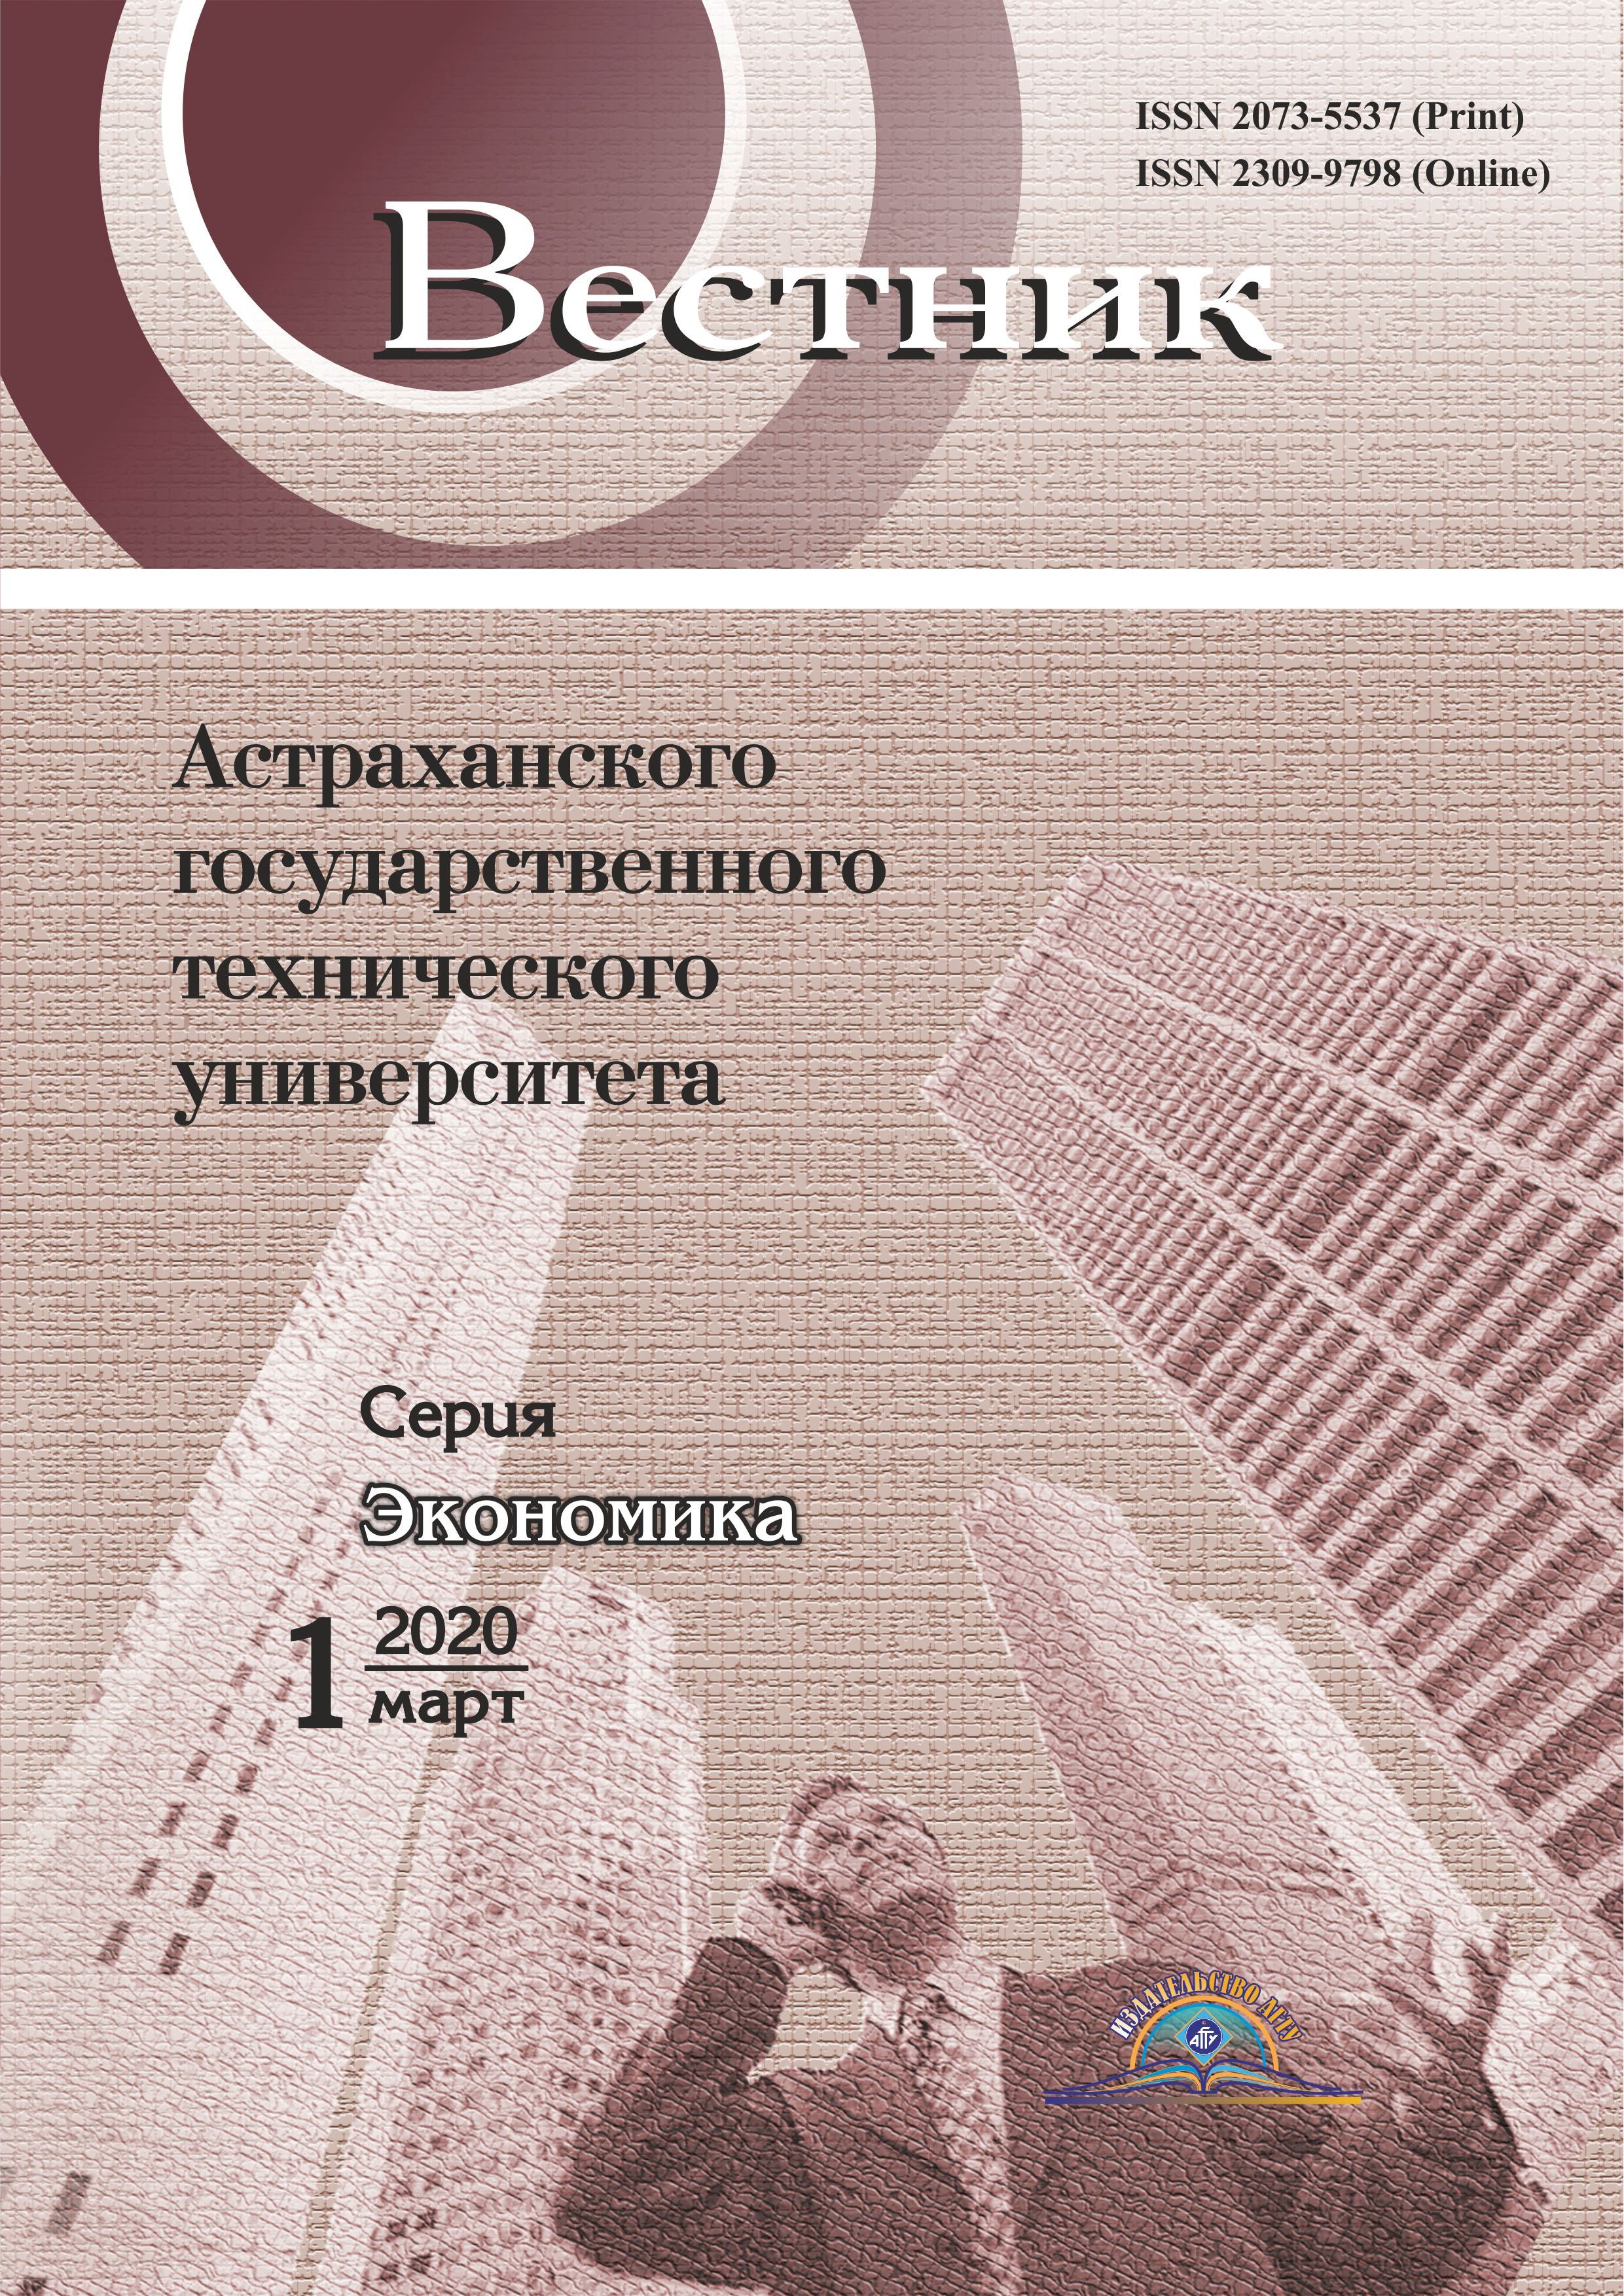                         Retrospective analysis of the USSR sea trade ports operation in conditions of new economic policy (1921-1928).
            